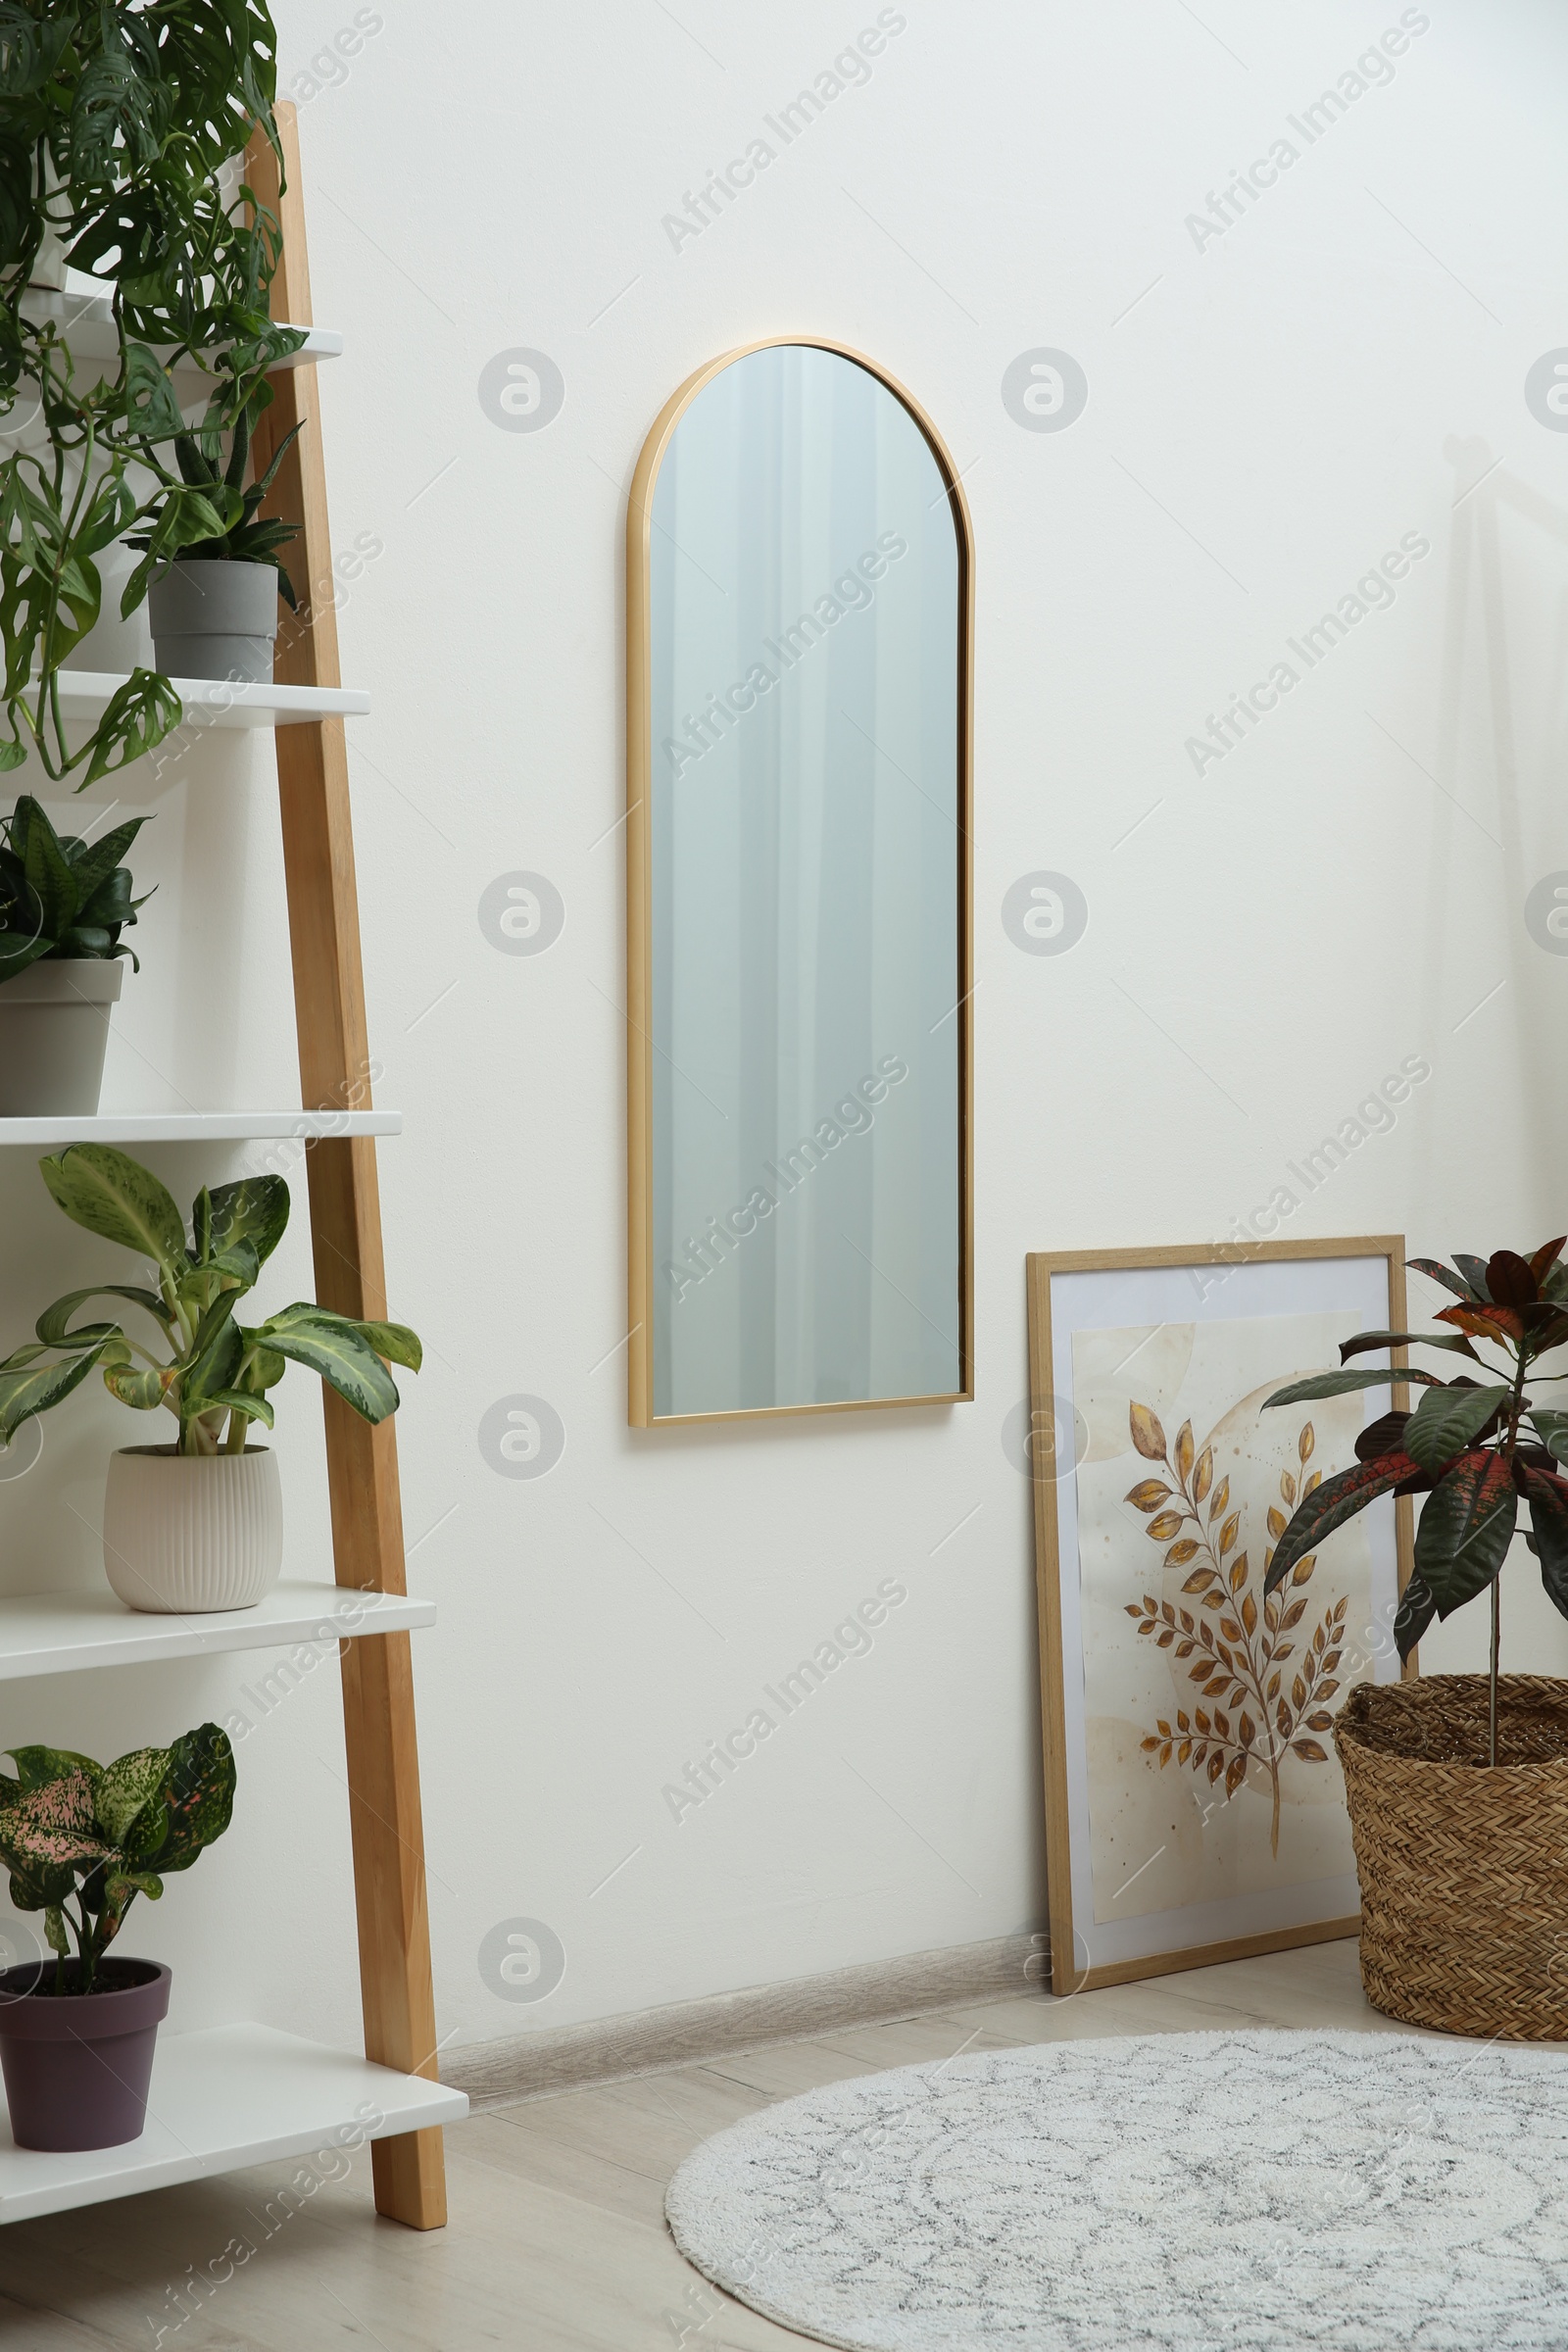 Photo of Interior accessories. Mirror, picture and shelving unit with houseplant near white wall in room